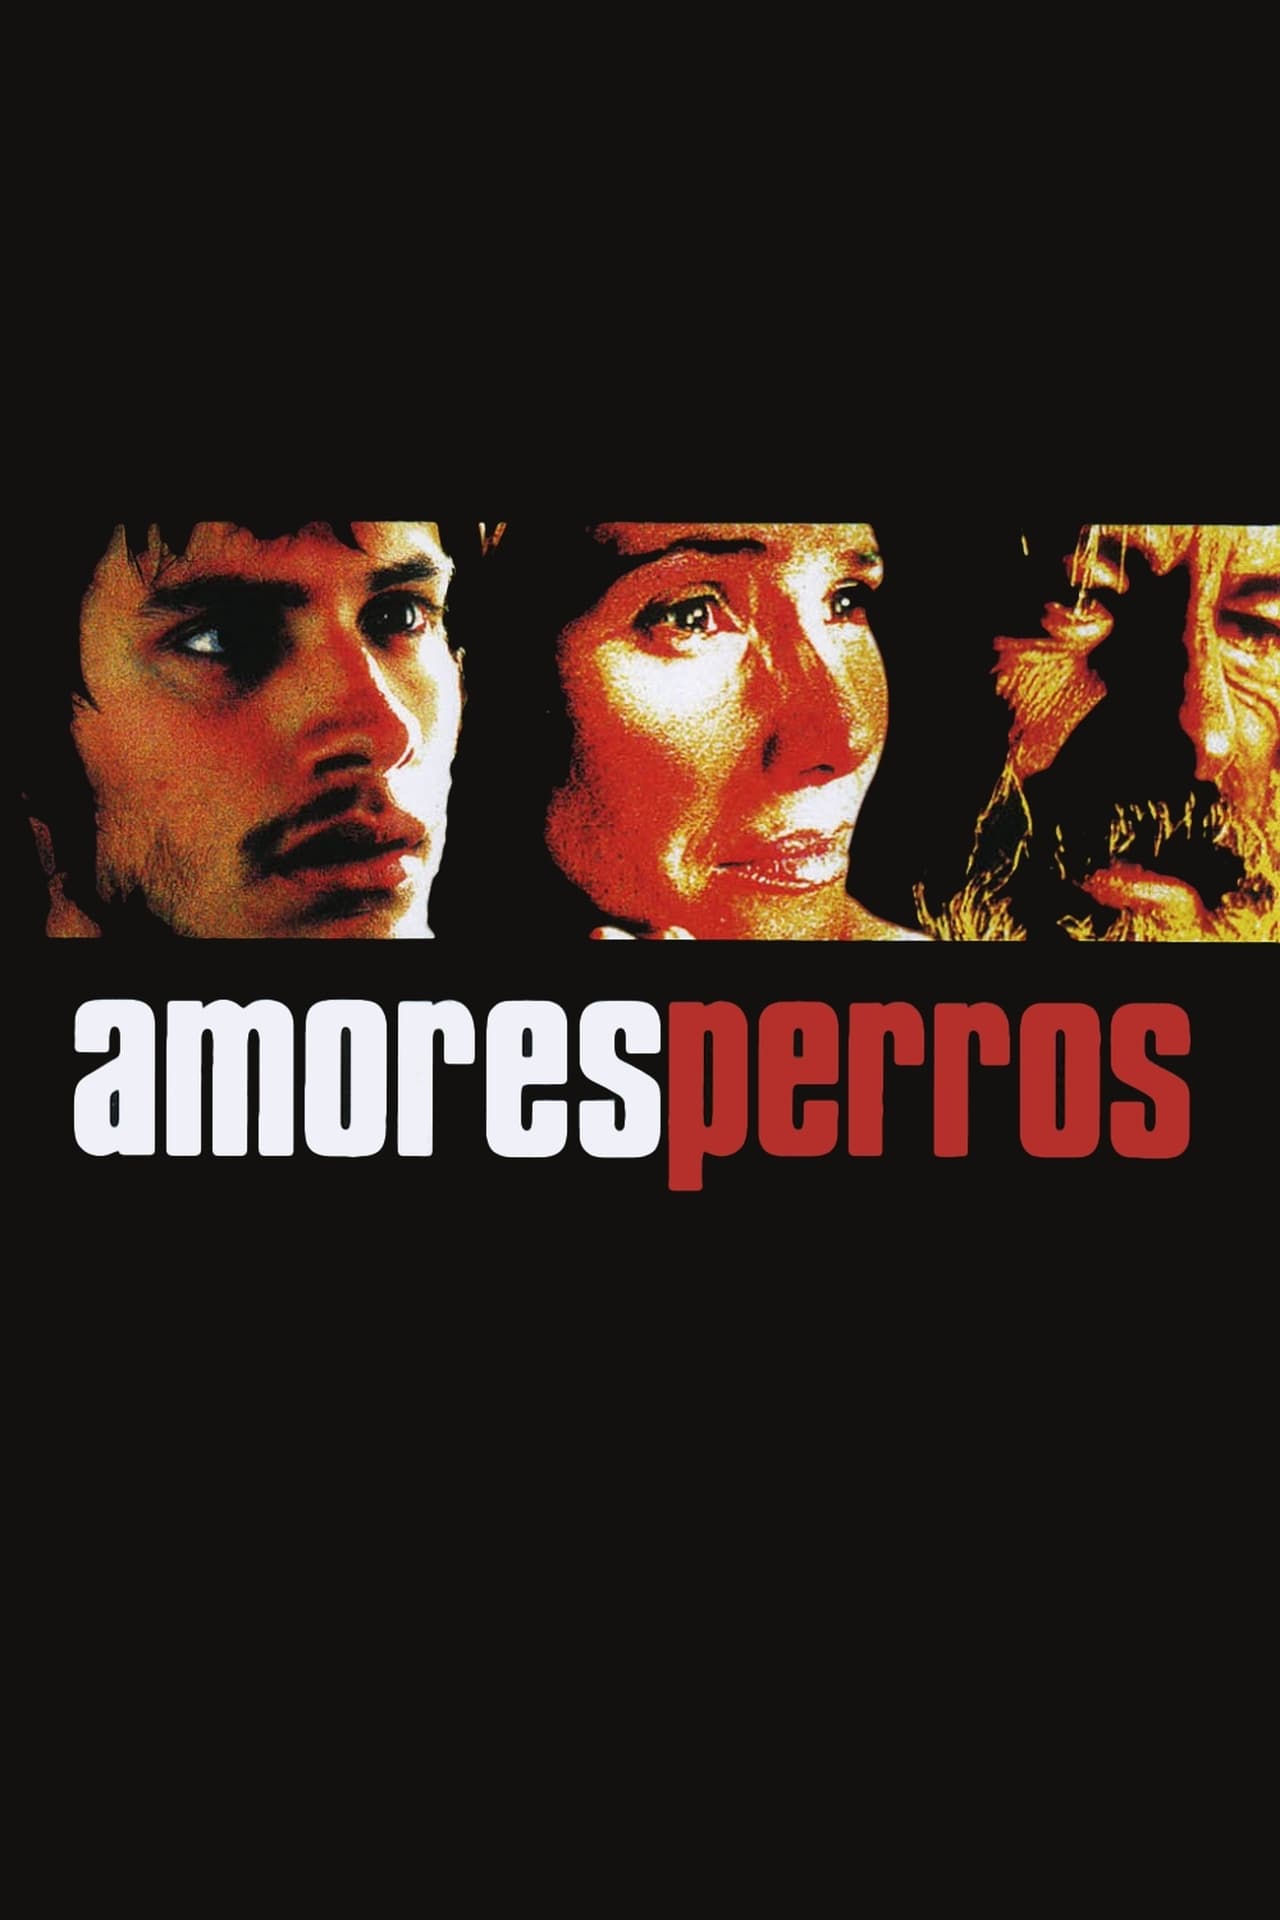 amores perros wiki